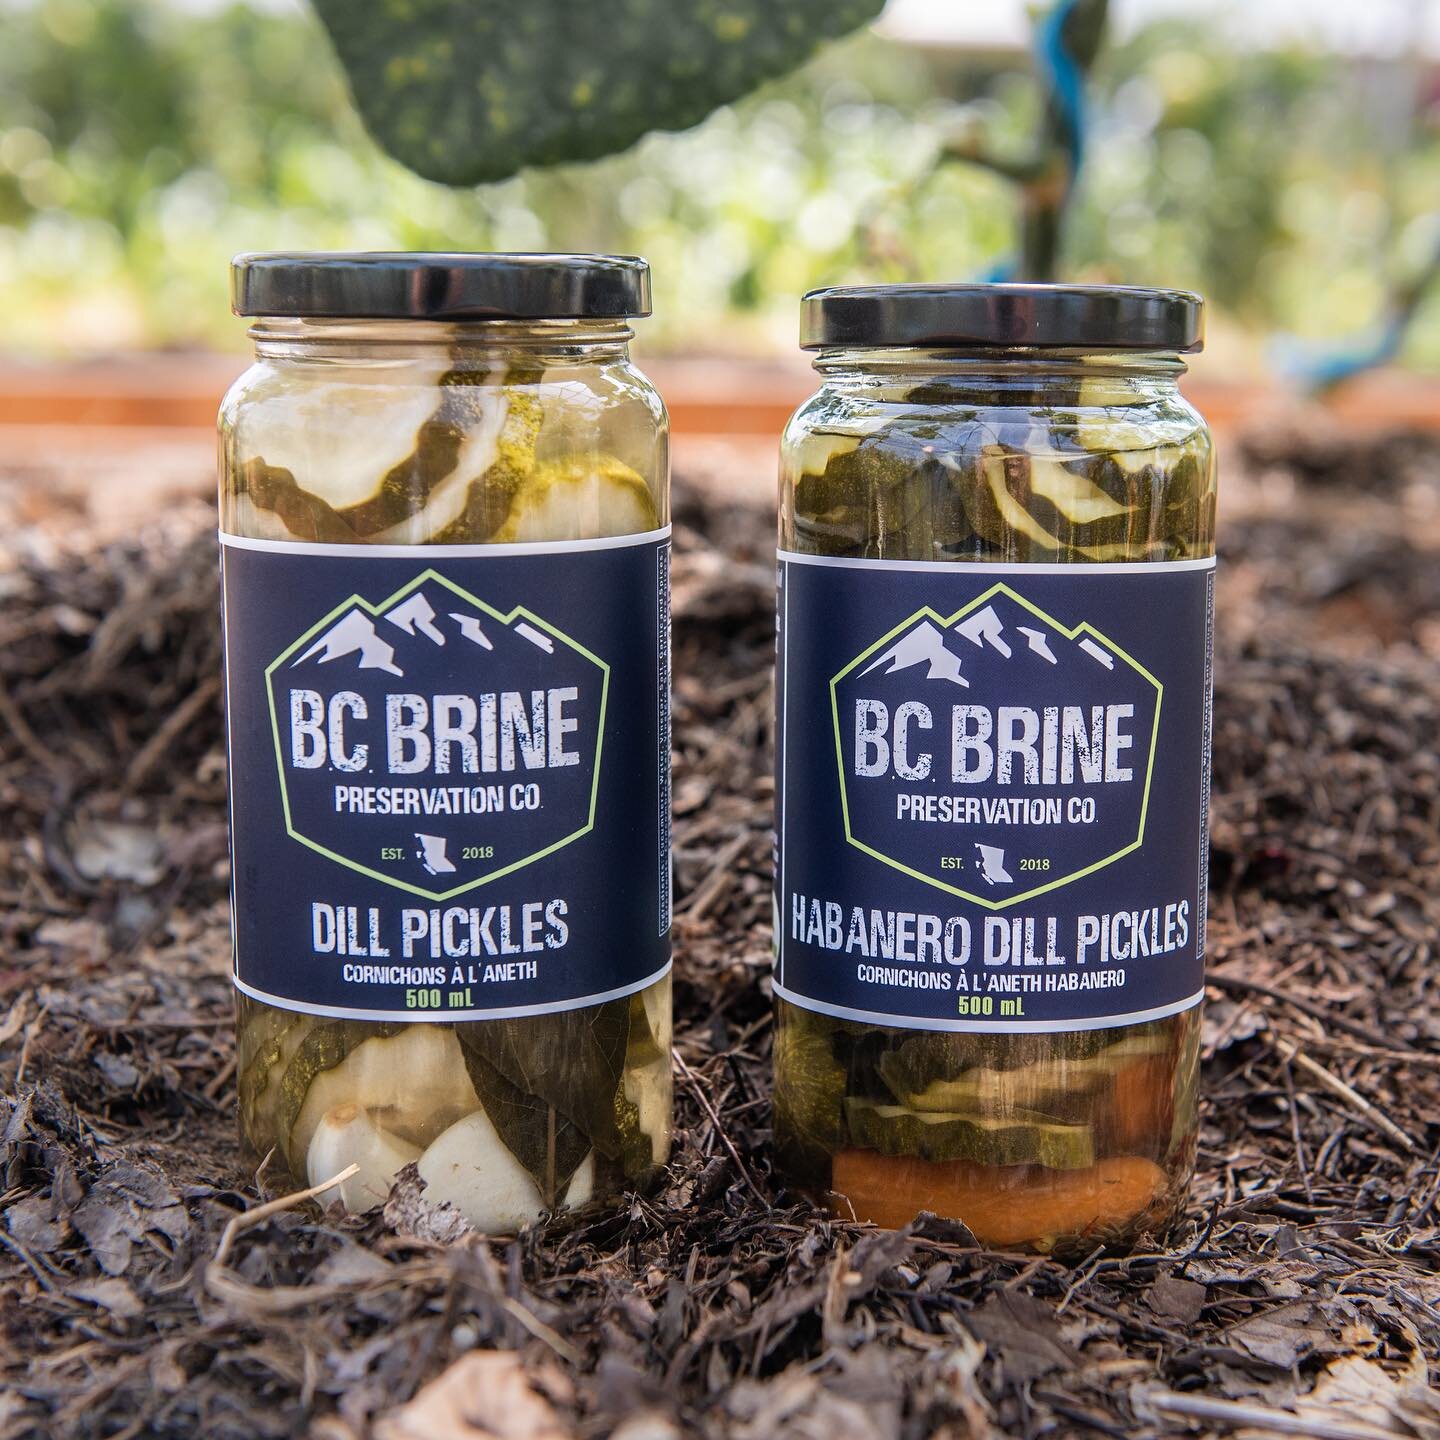 Why small batch pickles? Because they are amazing!
🥒
Every jar of B.C Brine is hand packed in Falkland, B.C. at their facility which allows the highest level of quality control. They care about creating gourmet pickles with simple ingredients and fr